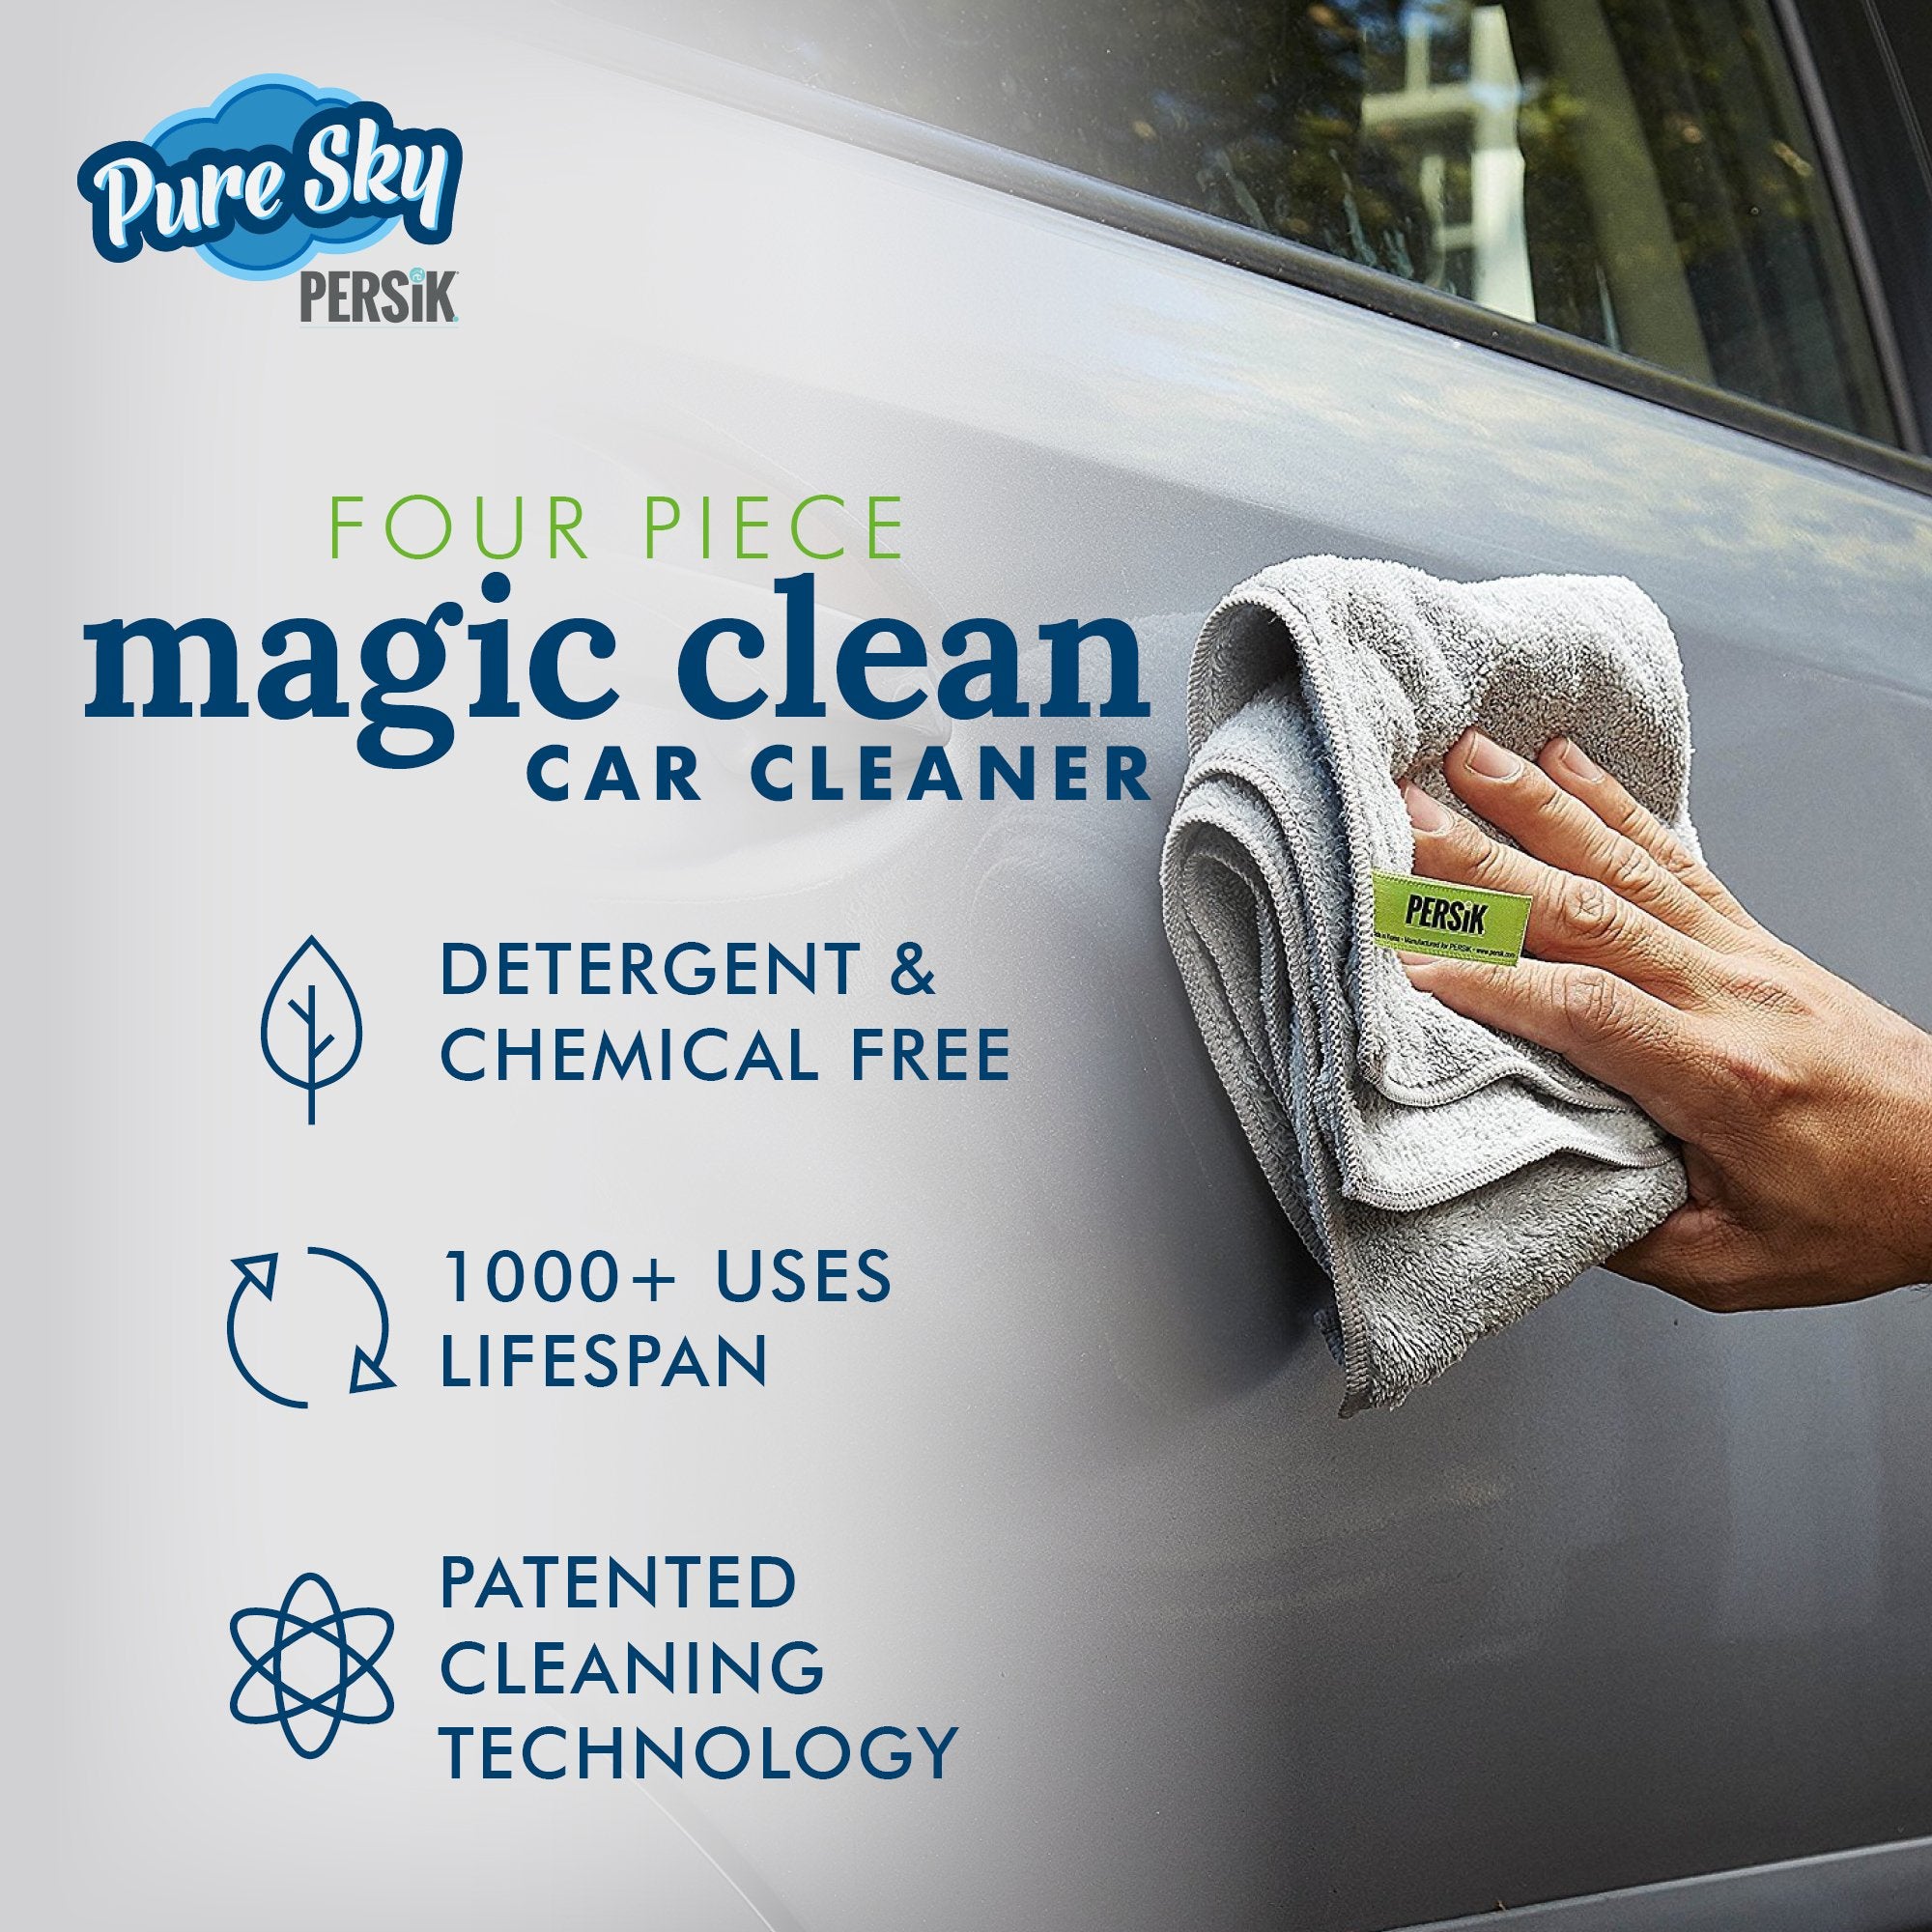 Persik Pure-Sky Window Glass Cleaning Cloth Review